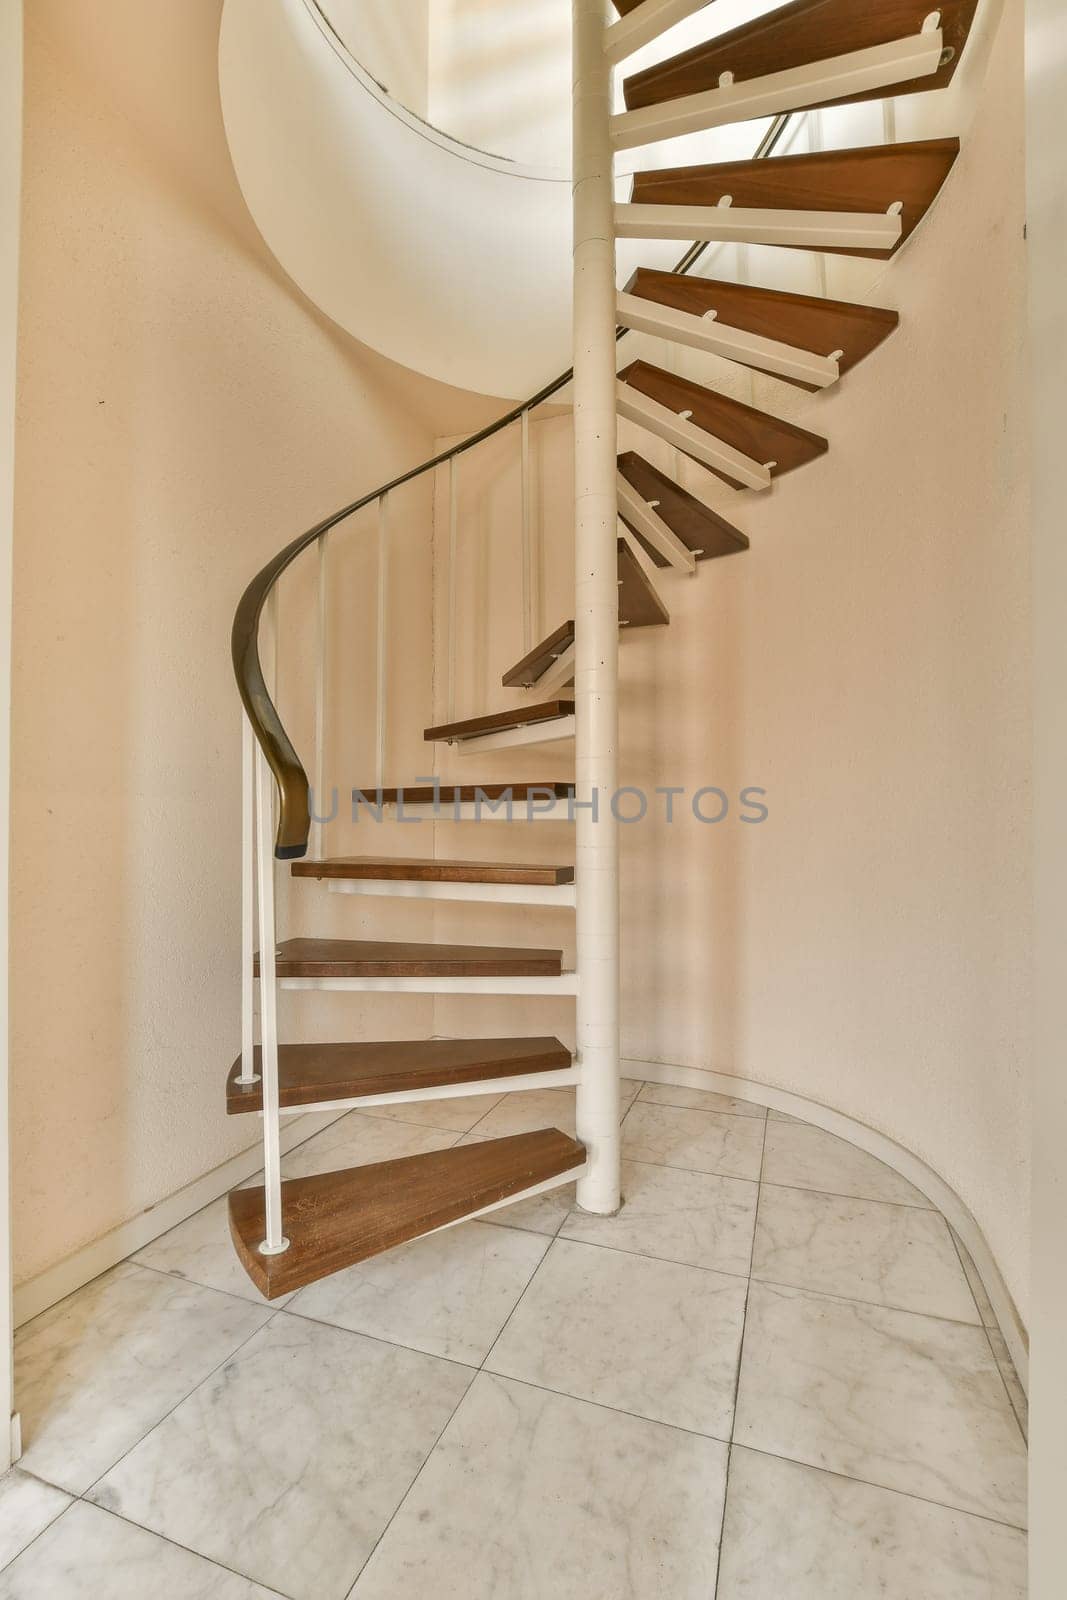 a spiral staircase in an empty room with white walls and marble flooring on either side, the stairs are made of wood